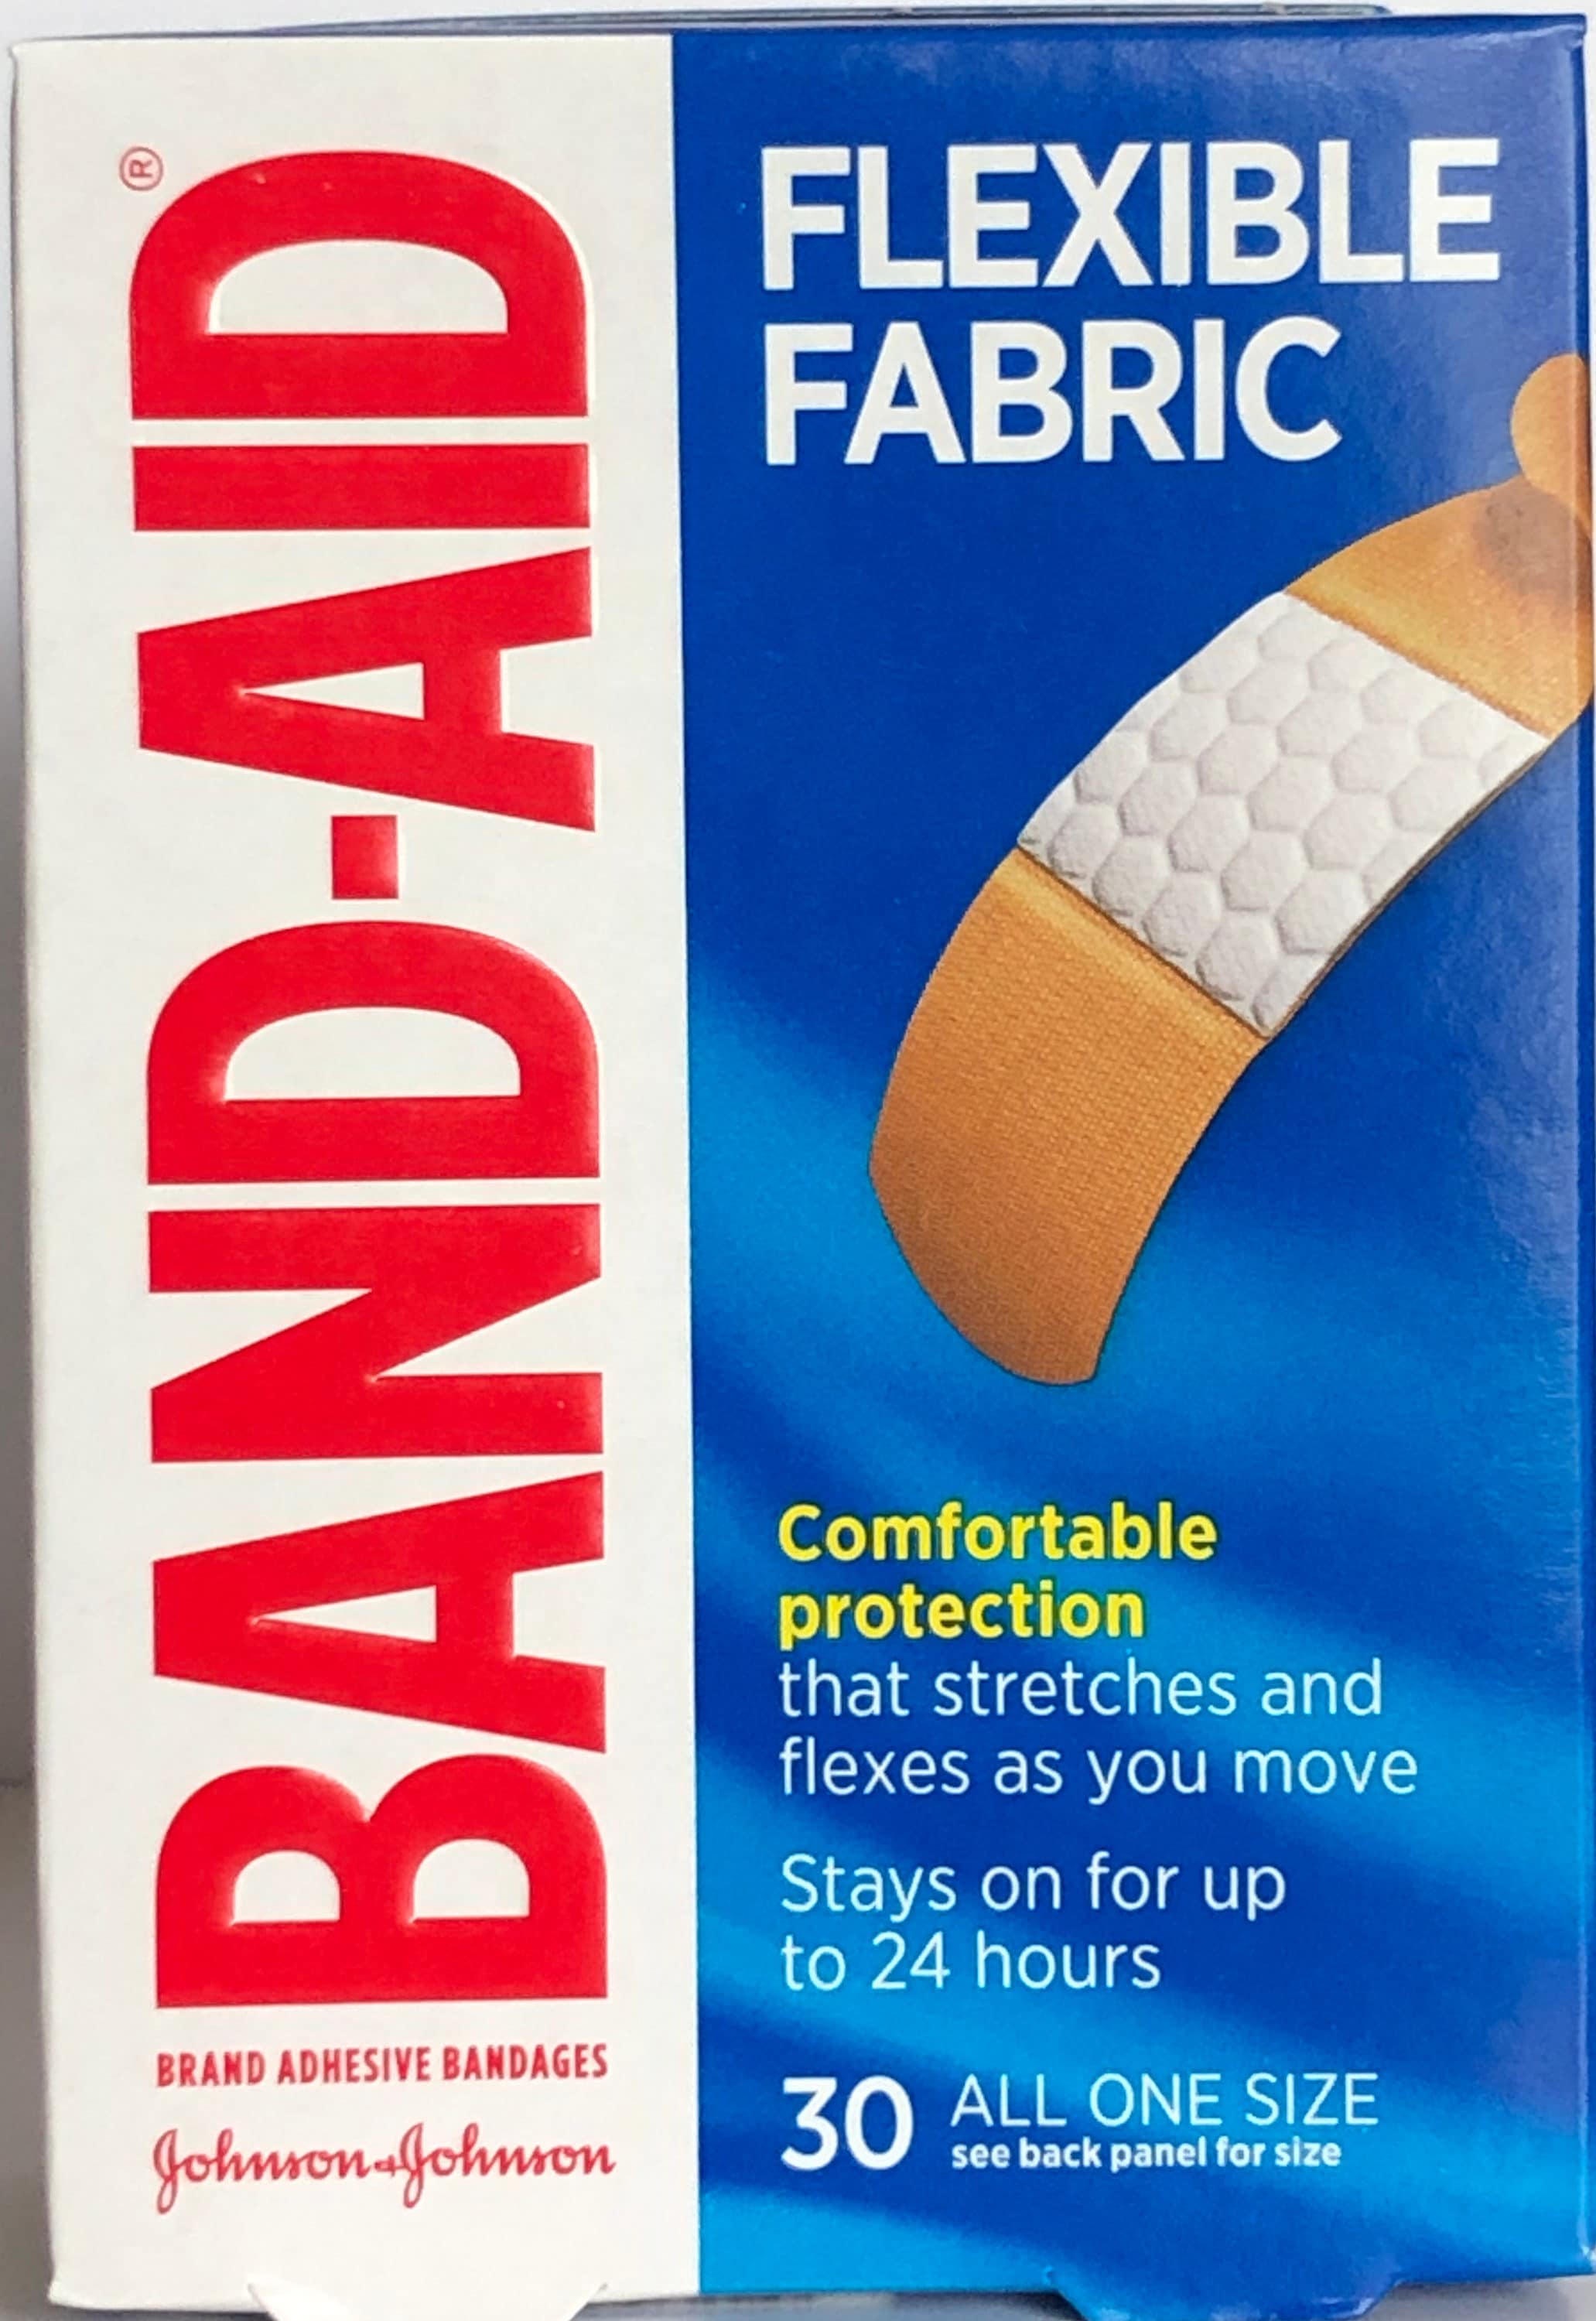 Band-Aid Brand First Aid Medical Paper Tape, 1 in by 10 yd, 2 ct